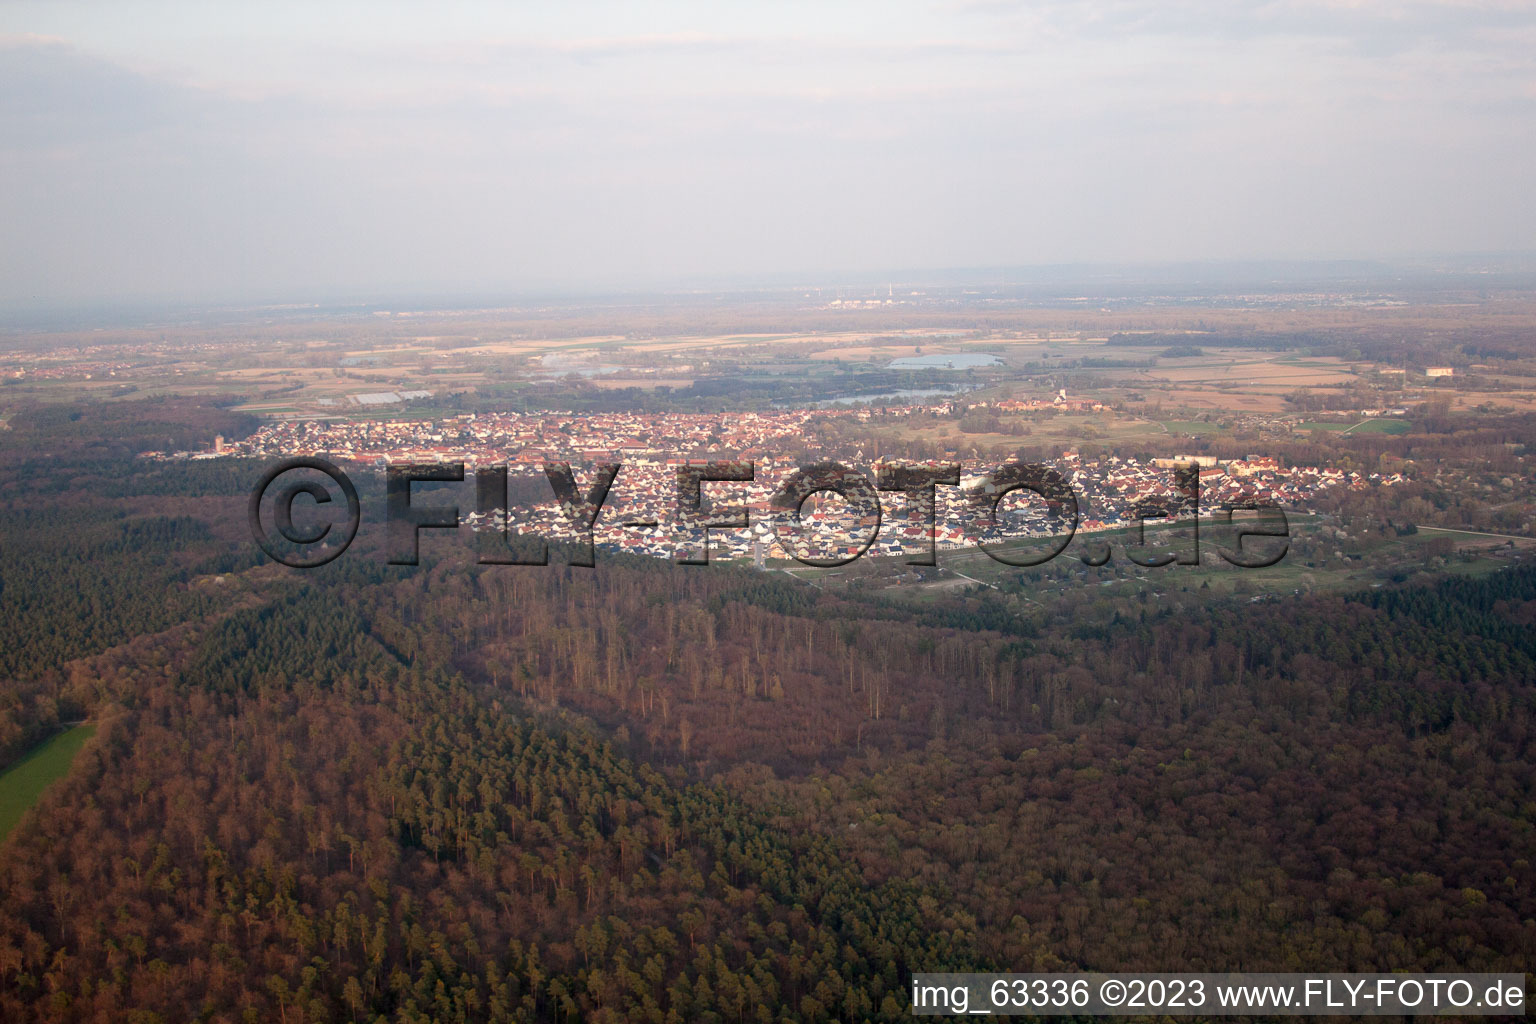 Drone recording of Jockgrim in the state Rhineland-Palatinate, Germany